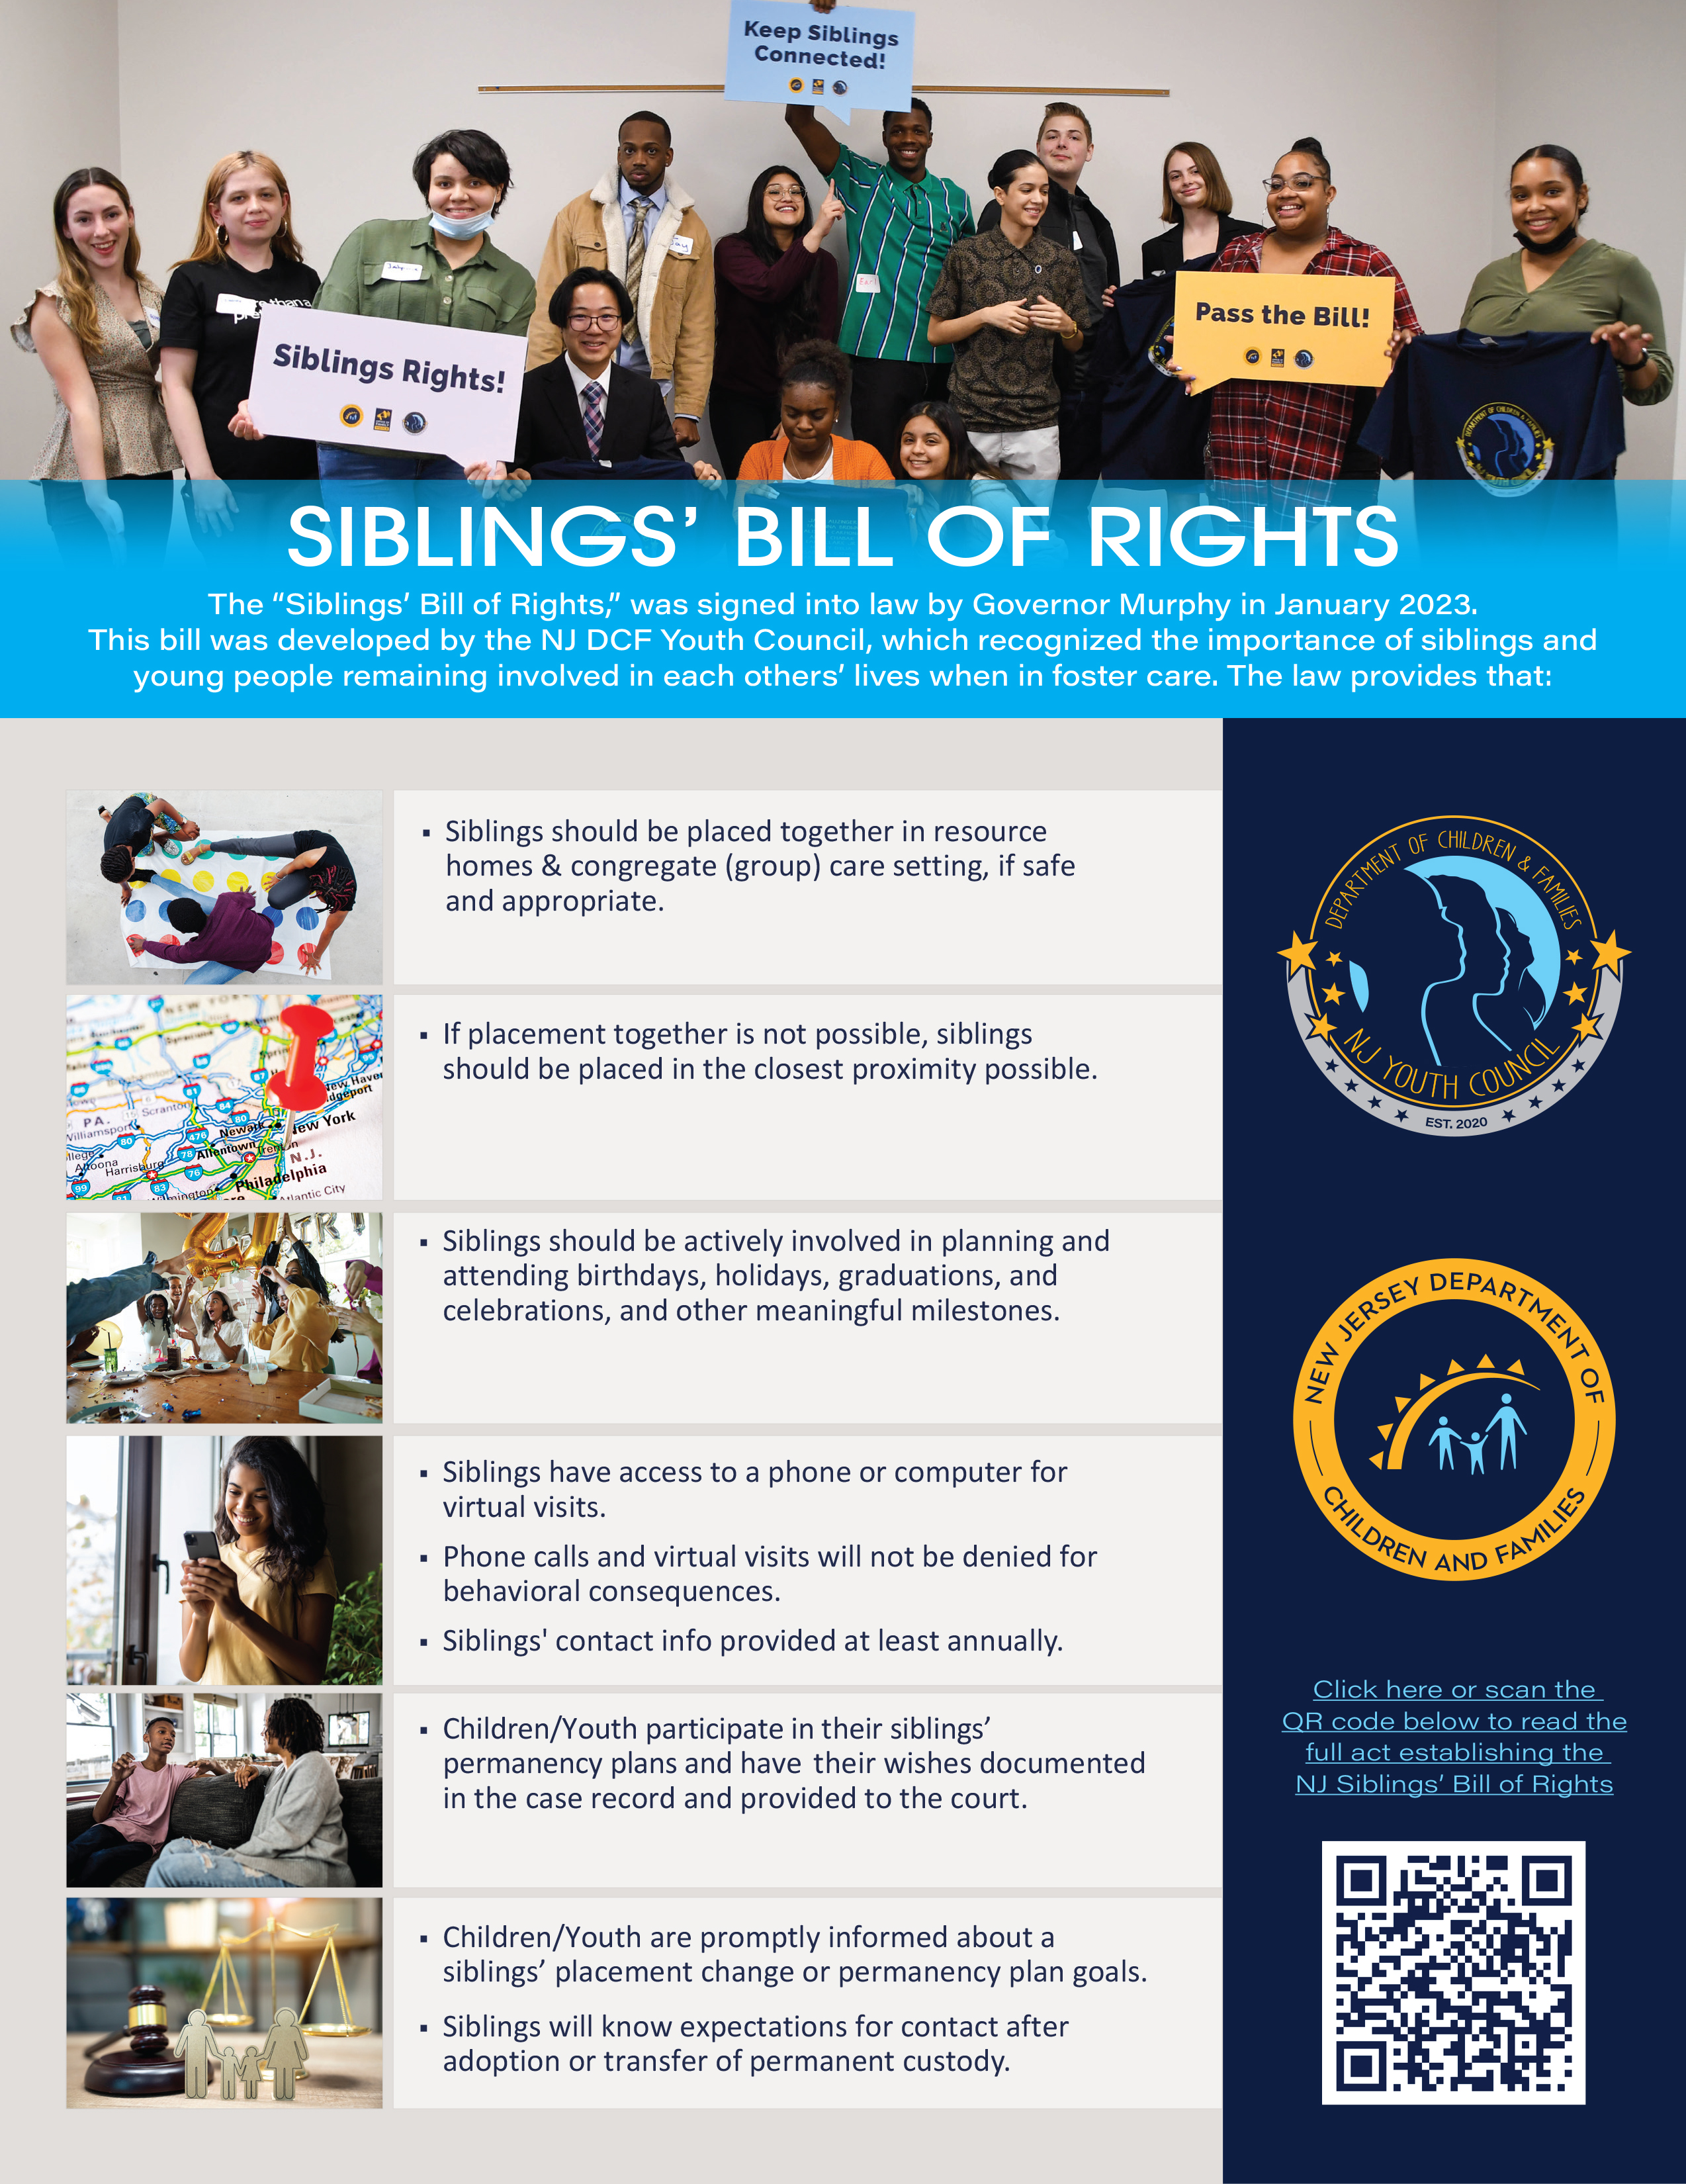 Sibling Bill of Rights Quick Notes (Click on image for full PDF)